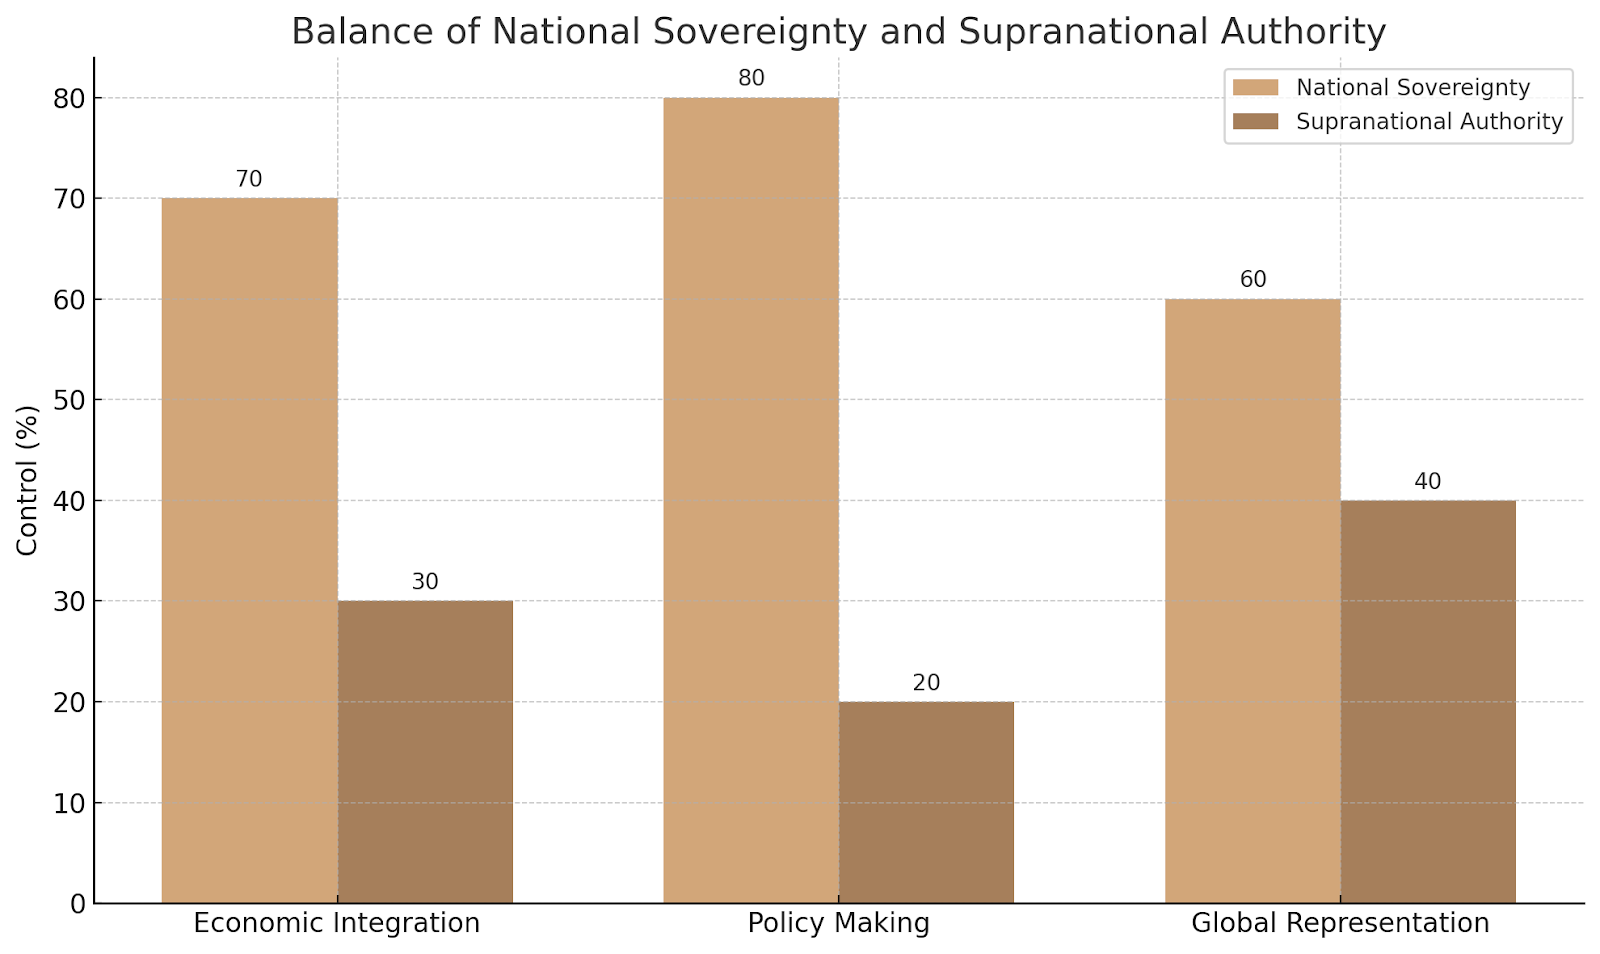 This visualization illustrates the balance of control between national sovereignty and supranational authority in the European Union, across three key areas: Economic Integration, Policy Making, and Global Representation.